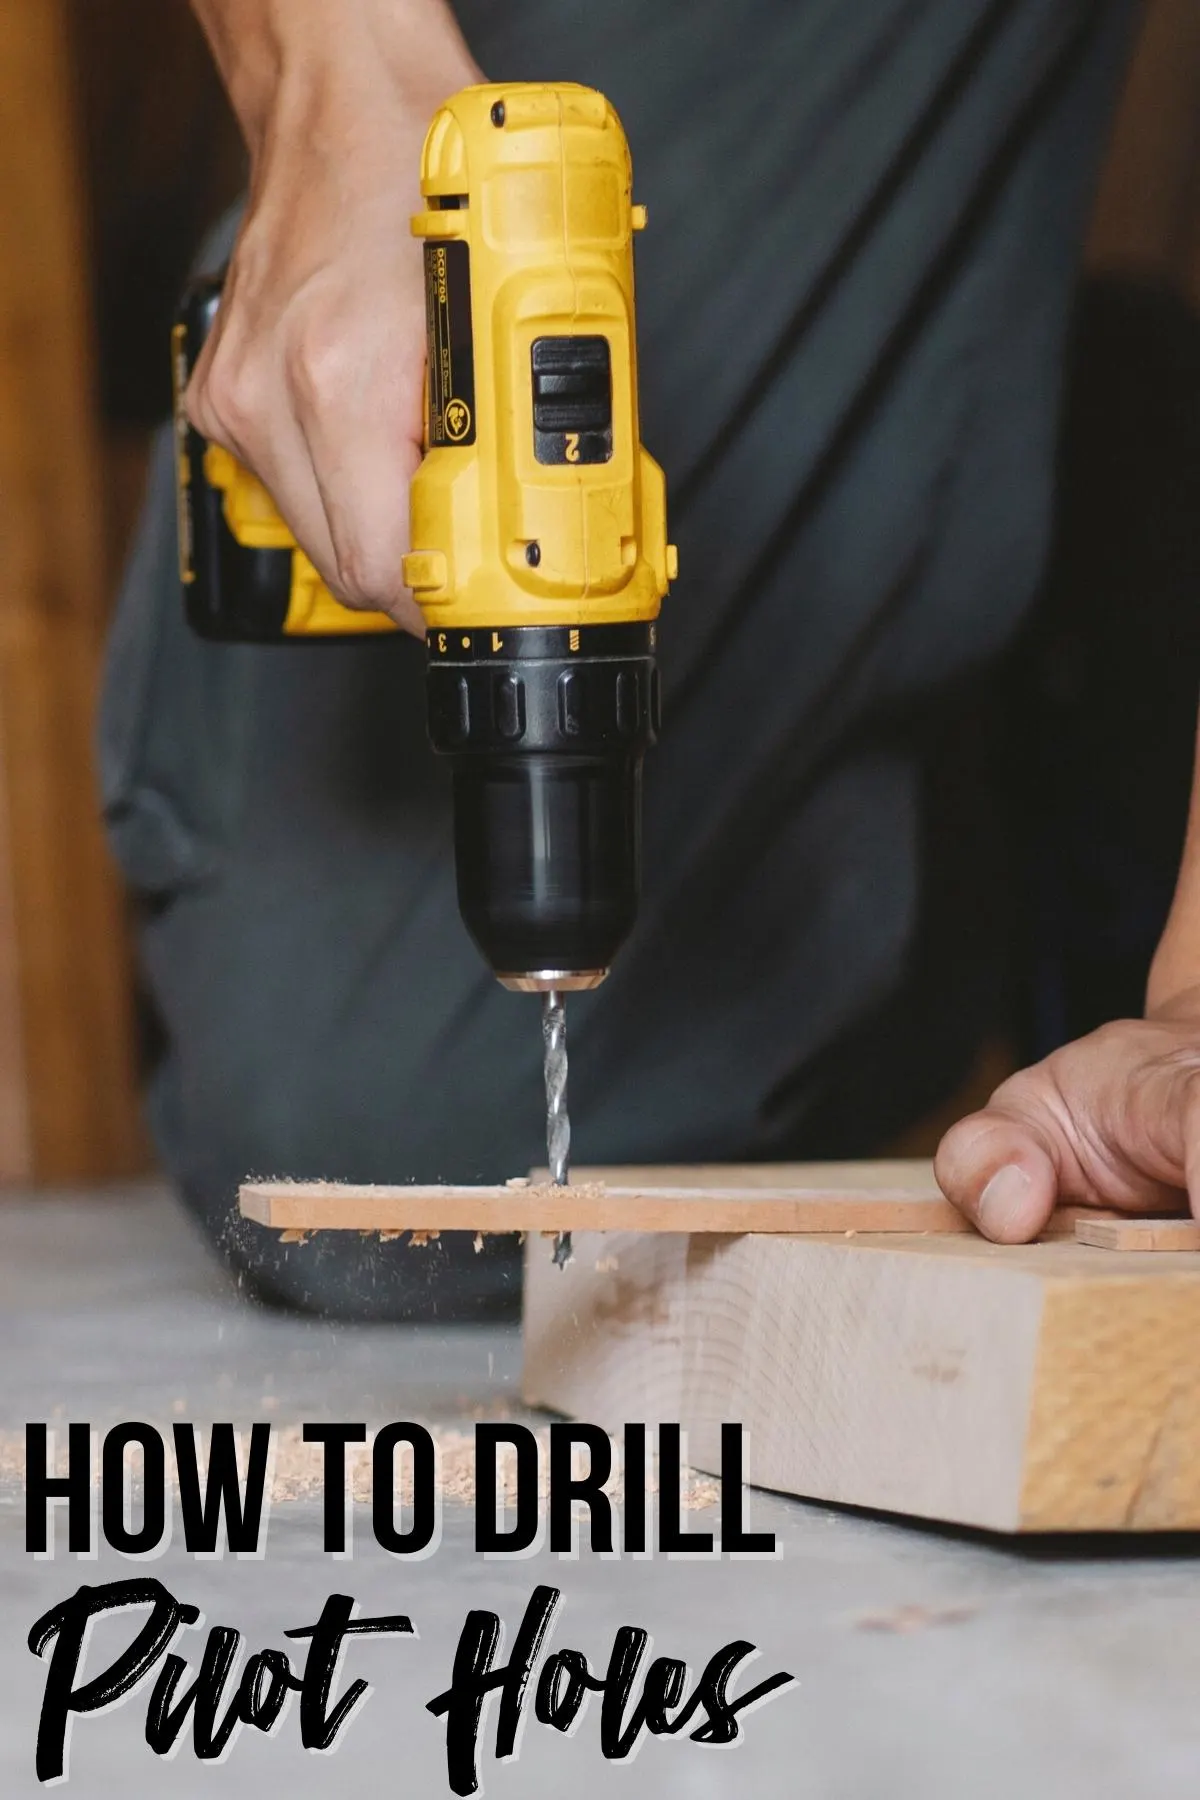 Select the right drill bit